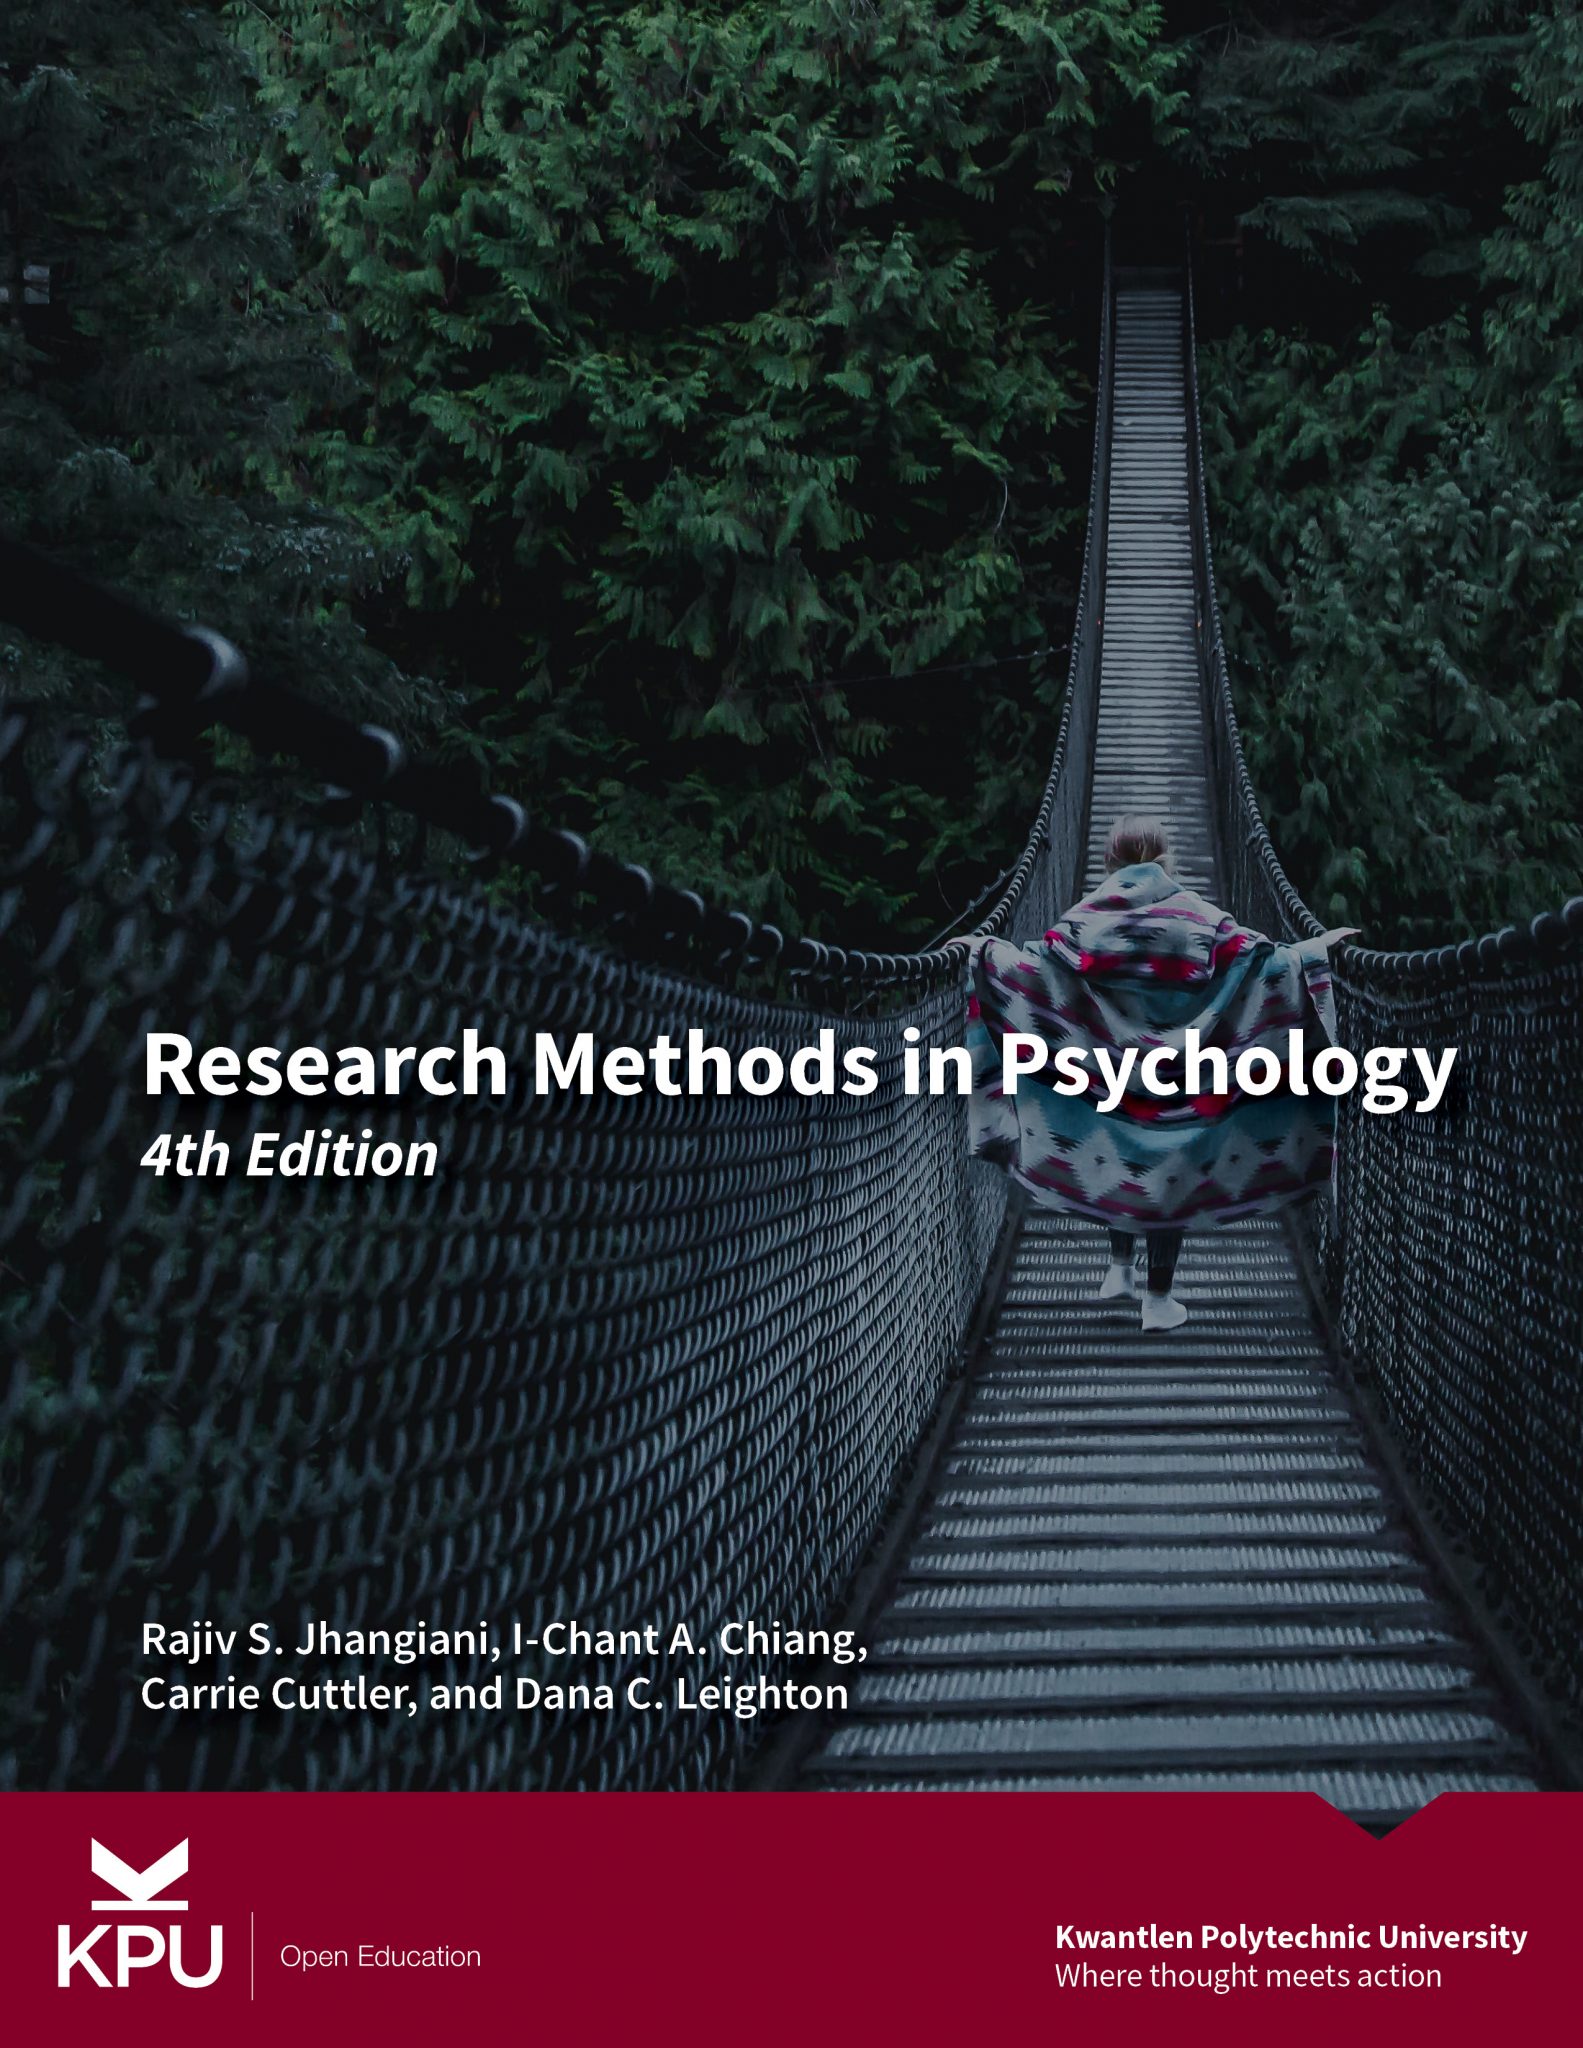 what paper is research methods in psychology